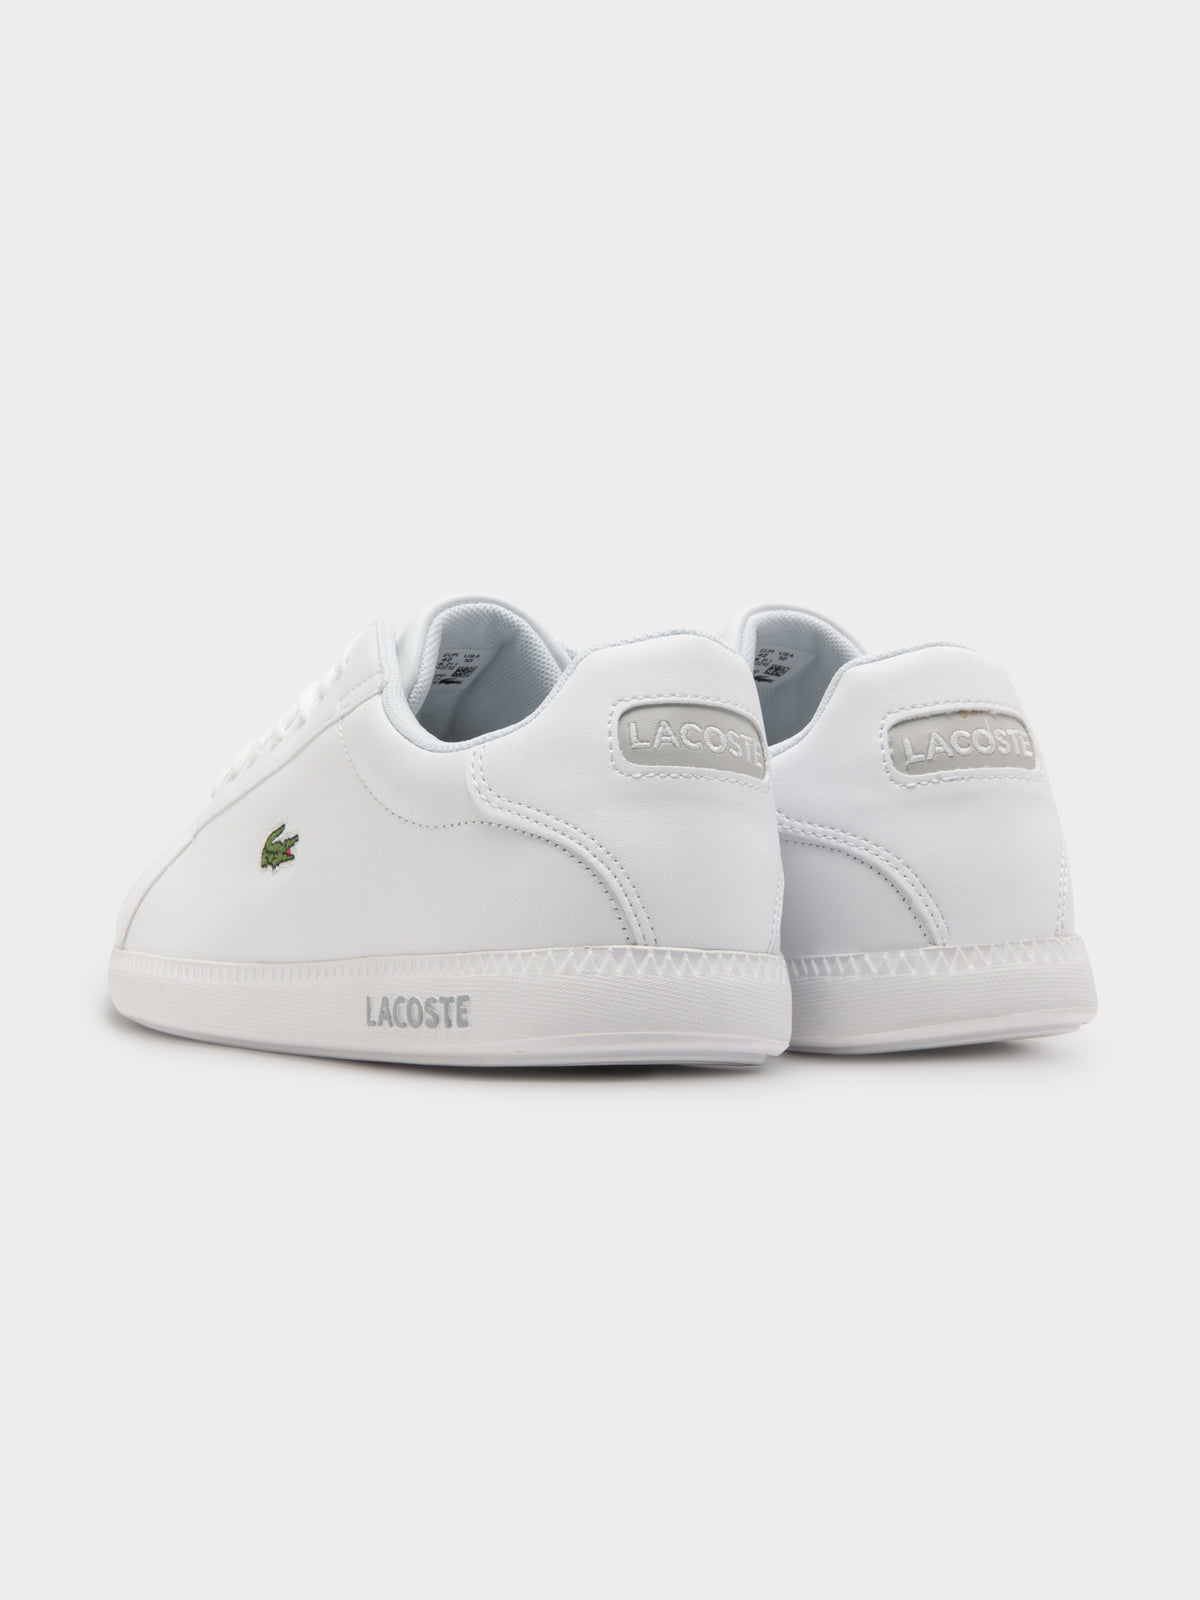 Womens Graduate BL Sneakers in White